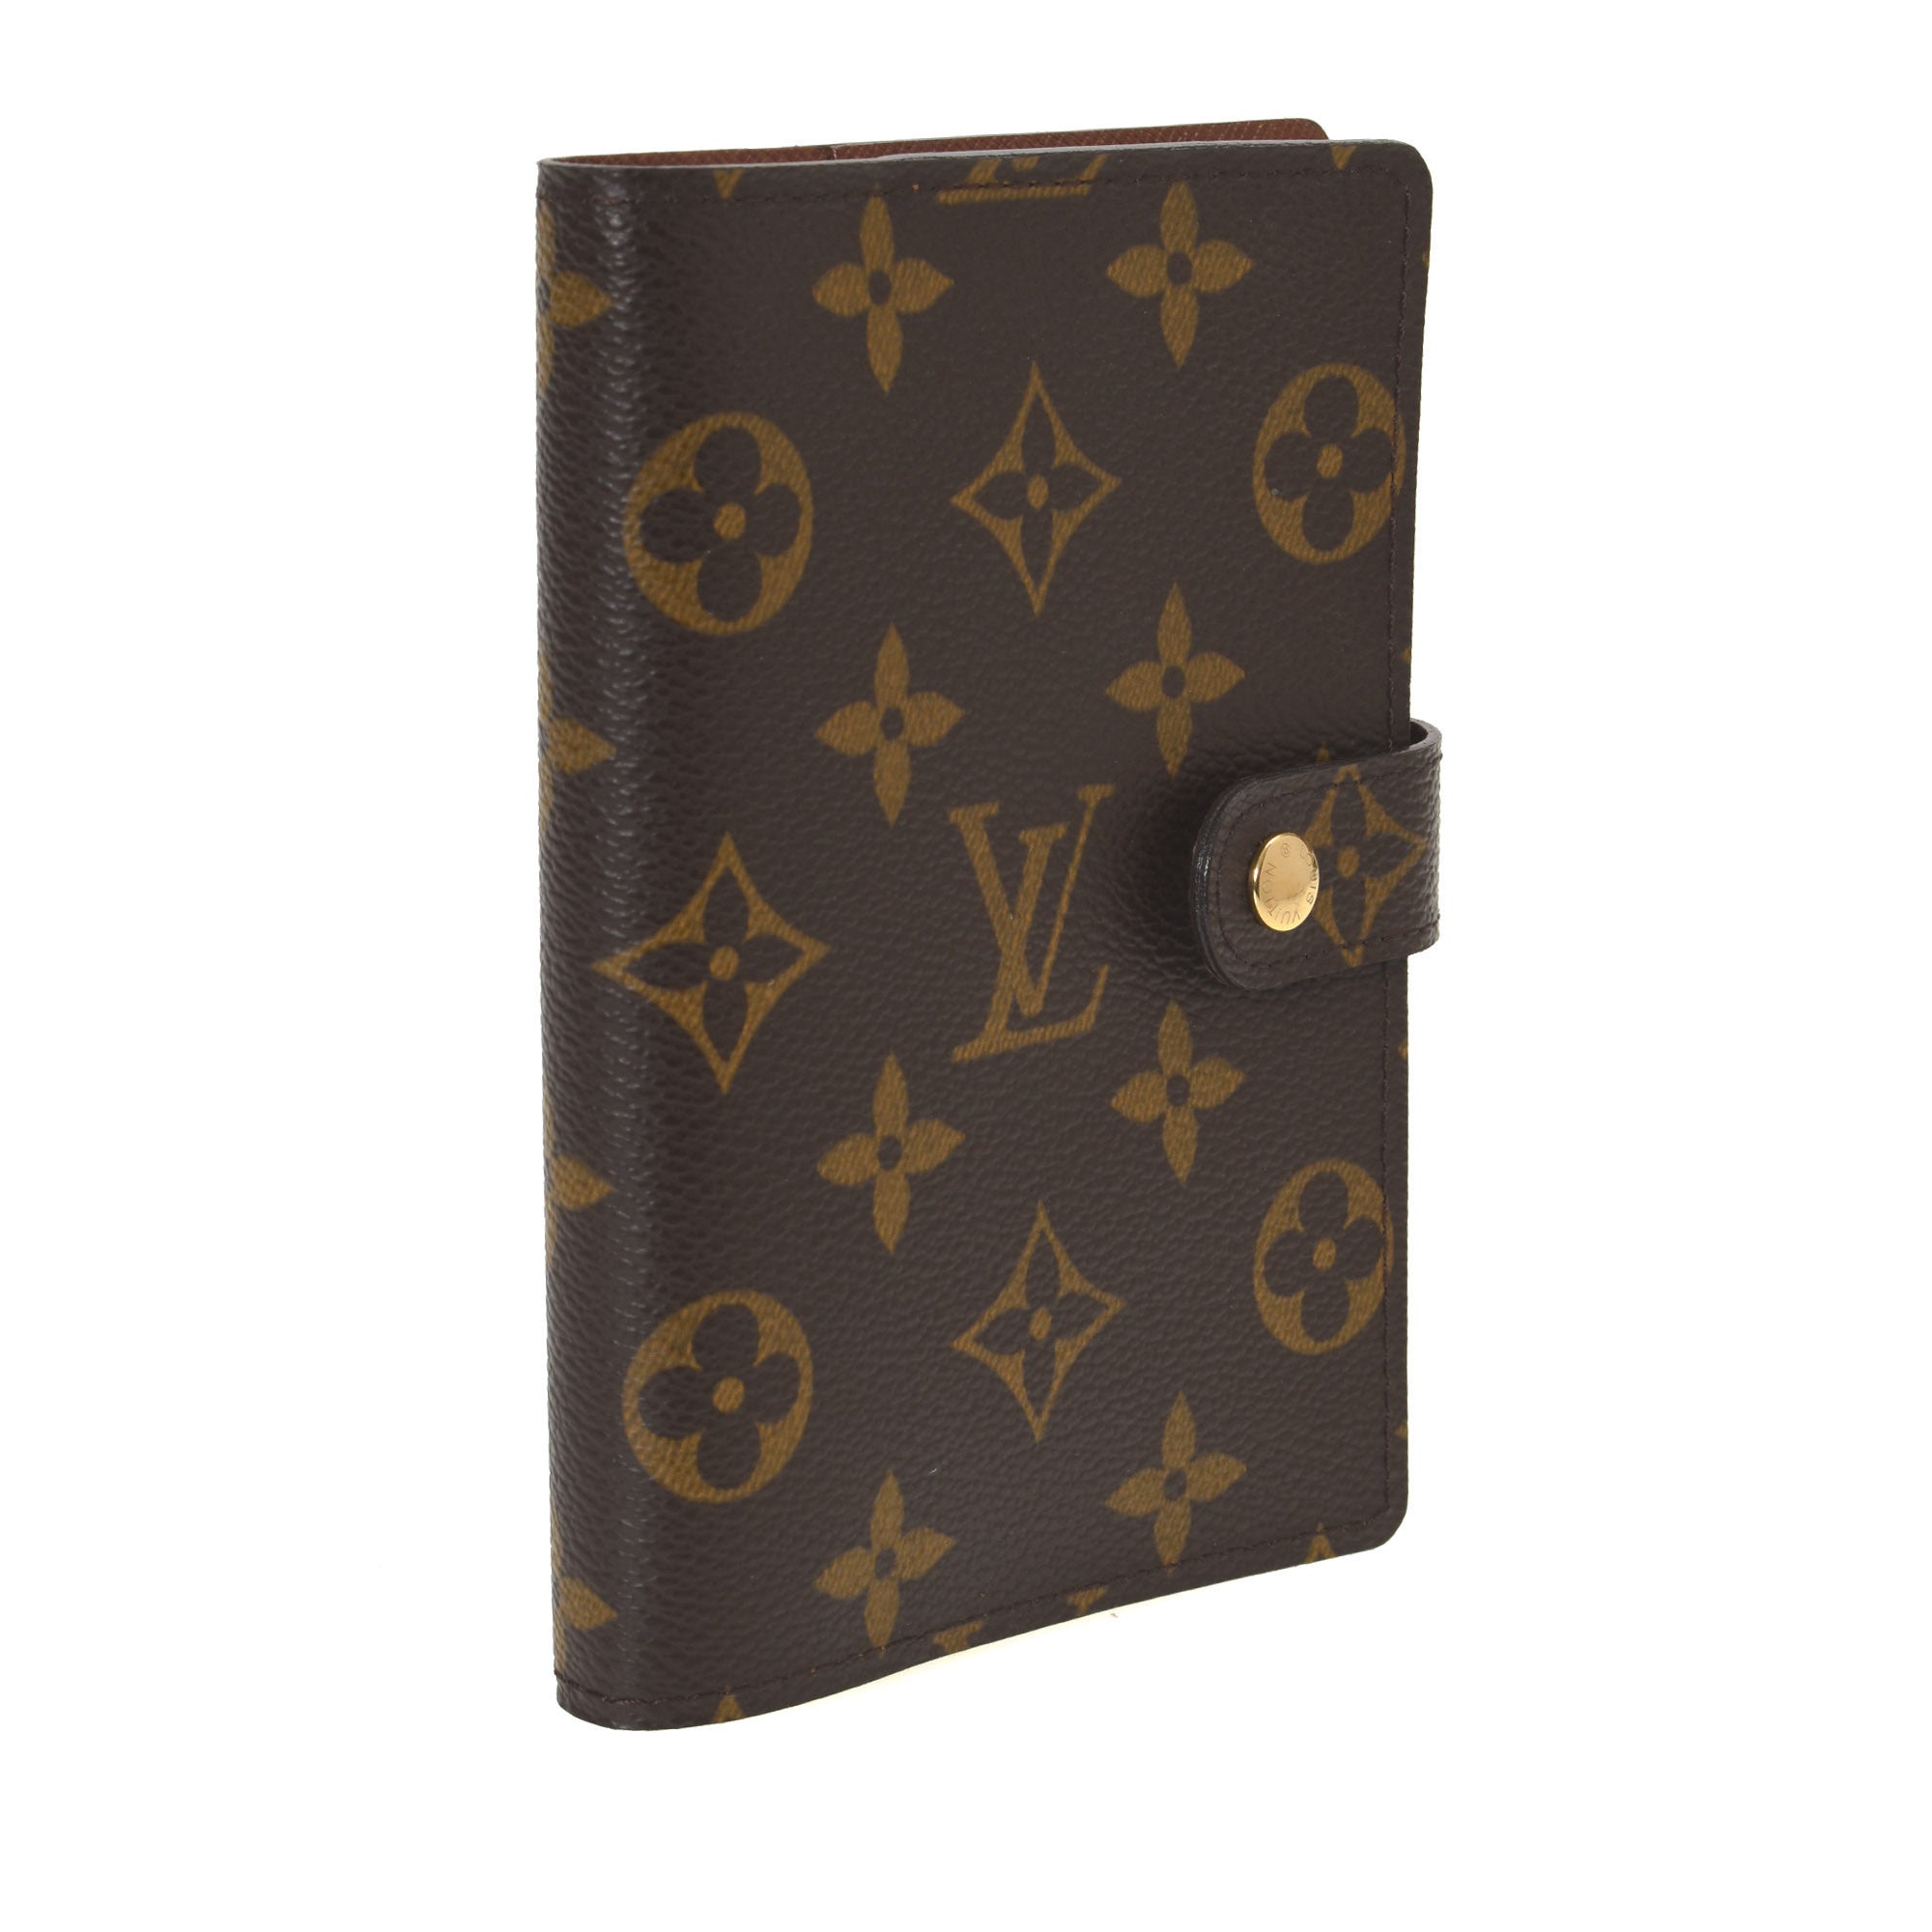 LOUIS VUITTON SMALL RING AGENDA COVER REVIEW - Luxeaholic